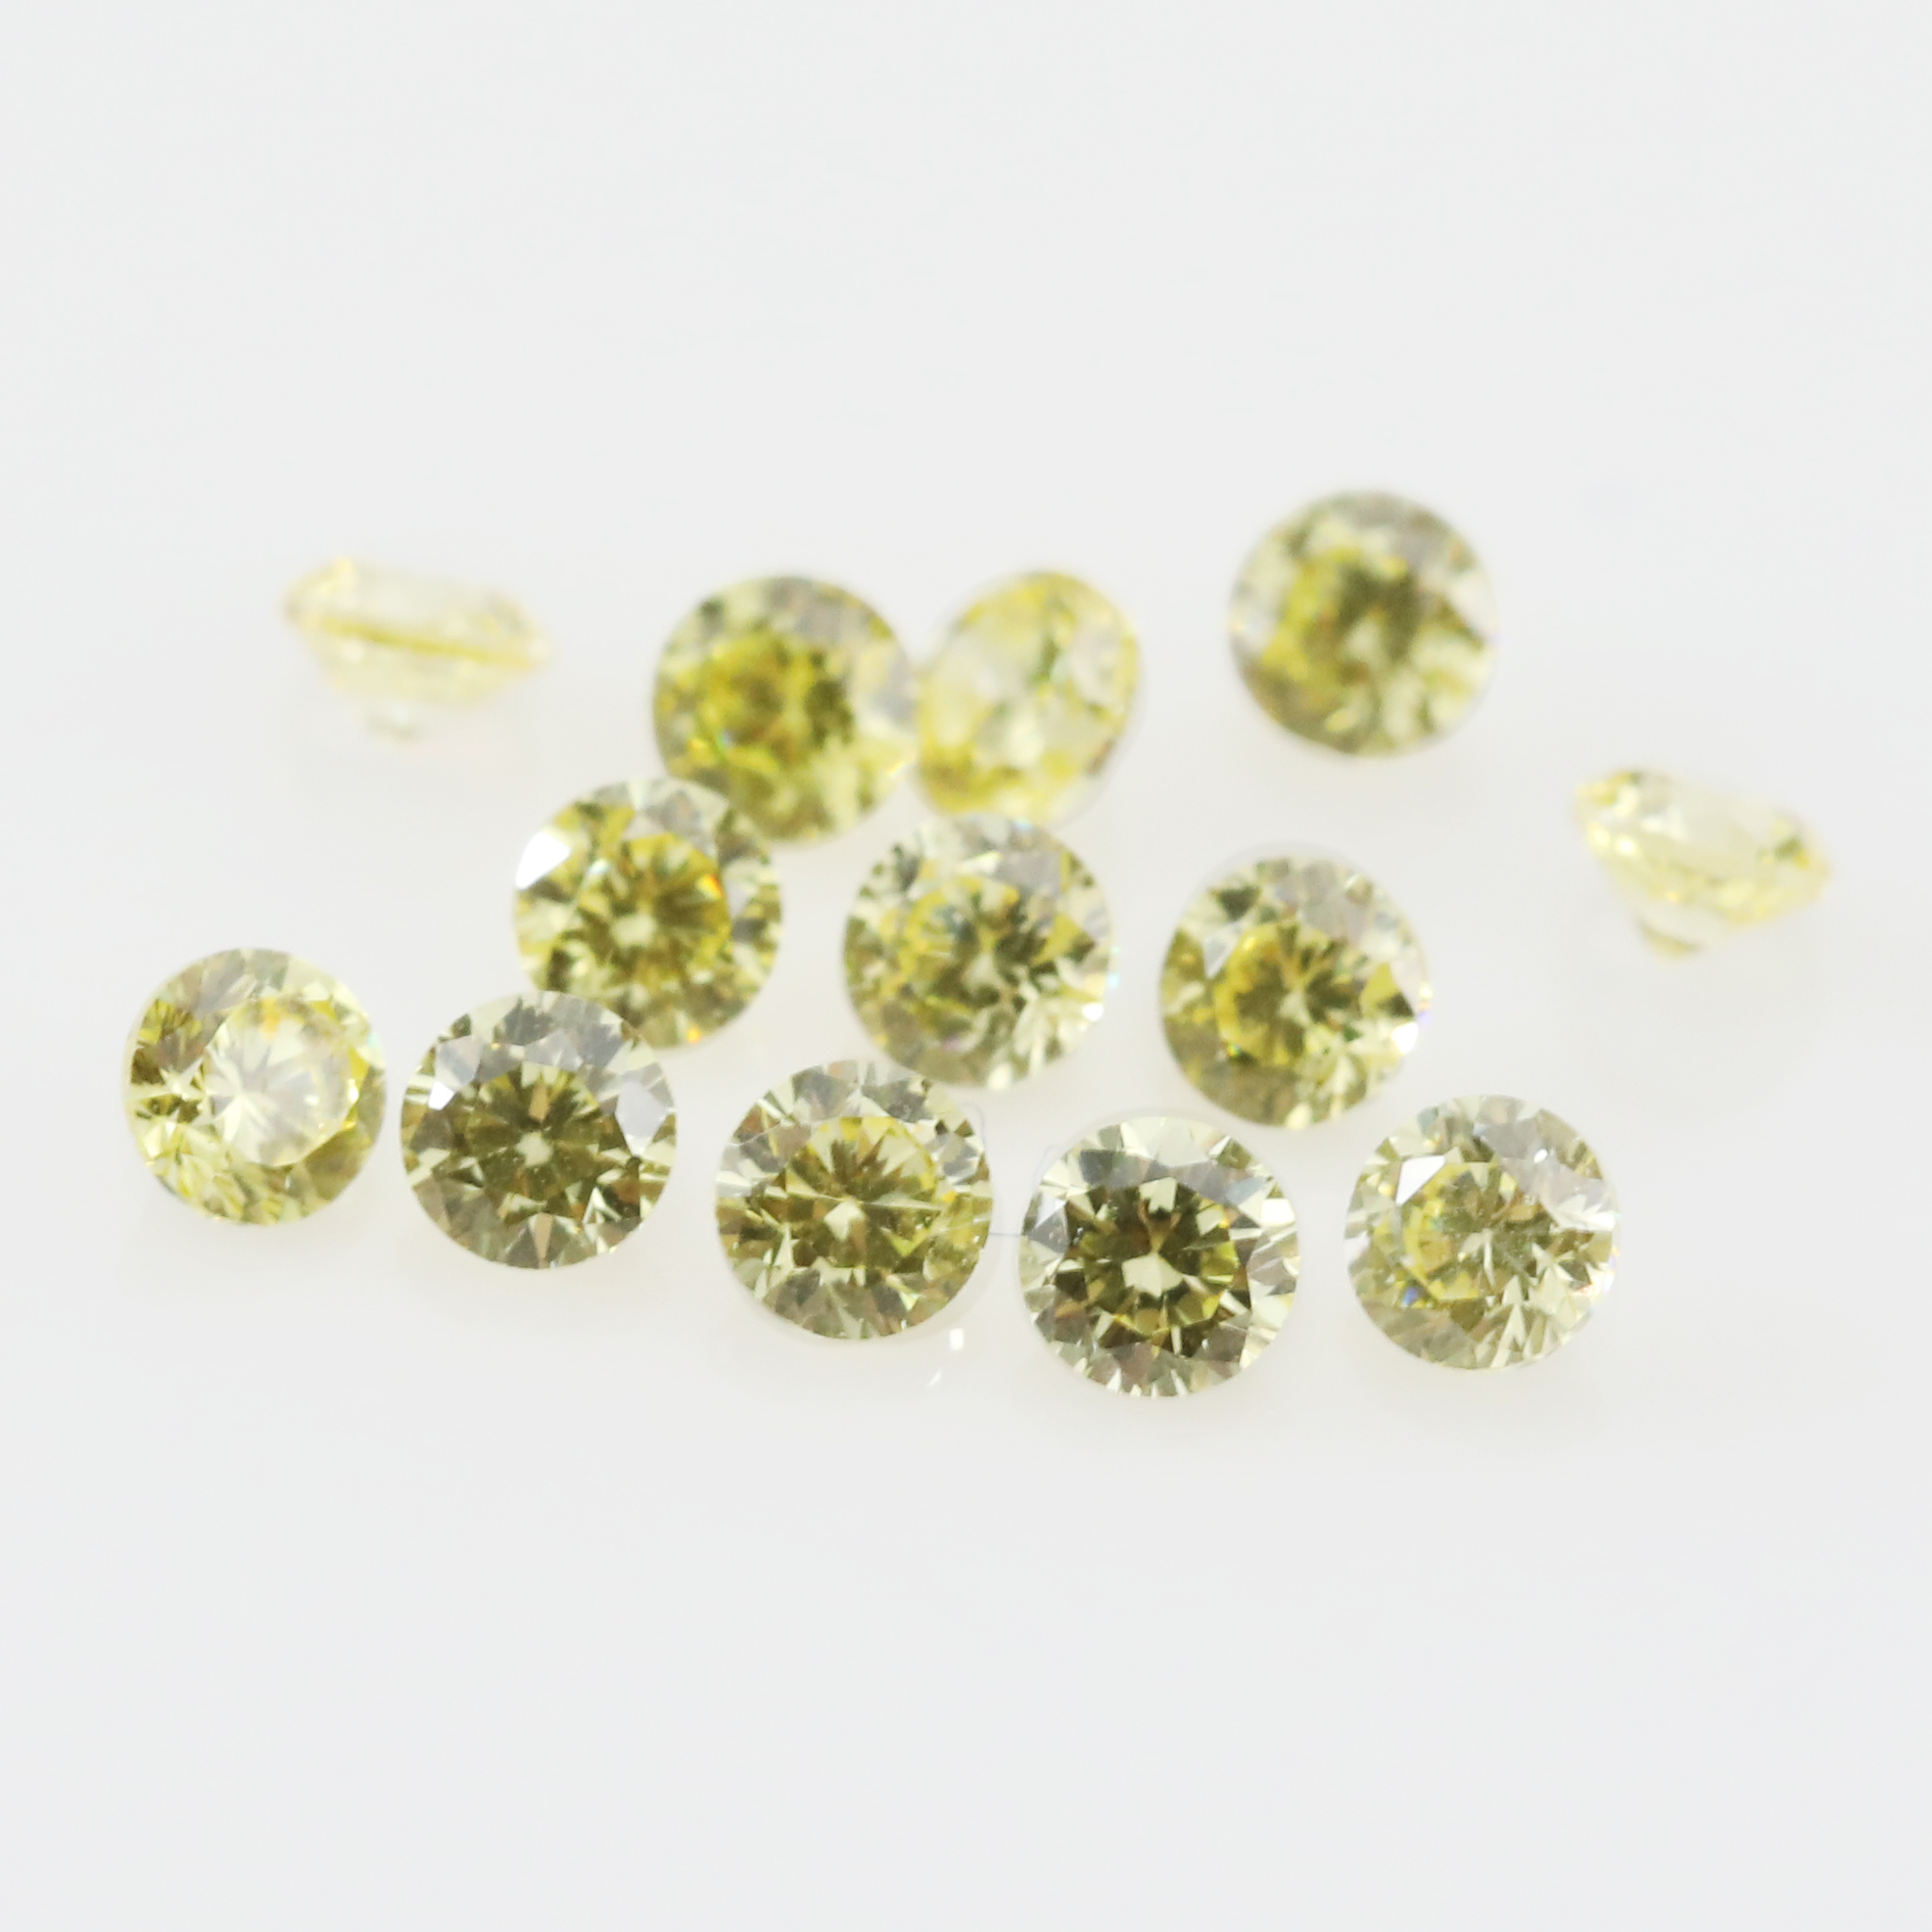 50Pcs 1MM Imitation Birthstone Round Faceted Color Cubic Zirconia CZ Stone DIY Loose Stone Supplies 4110183-1MM - Click Image to Close